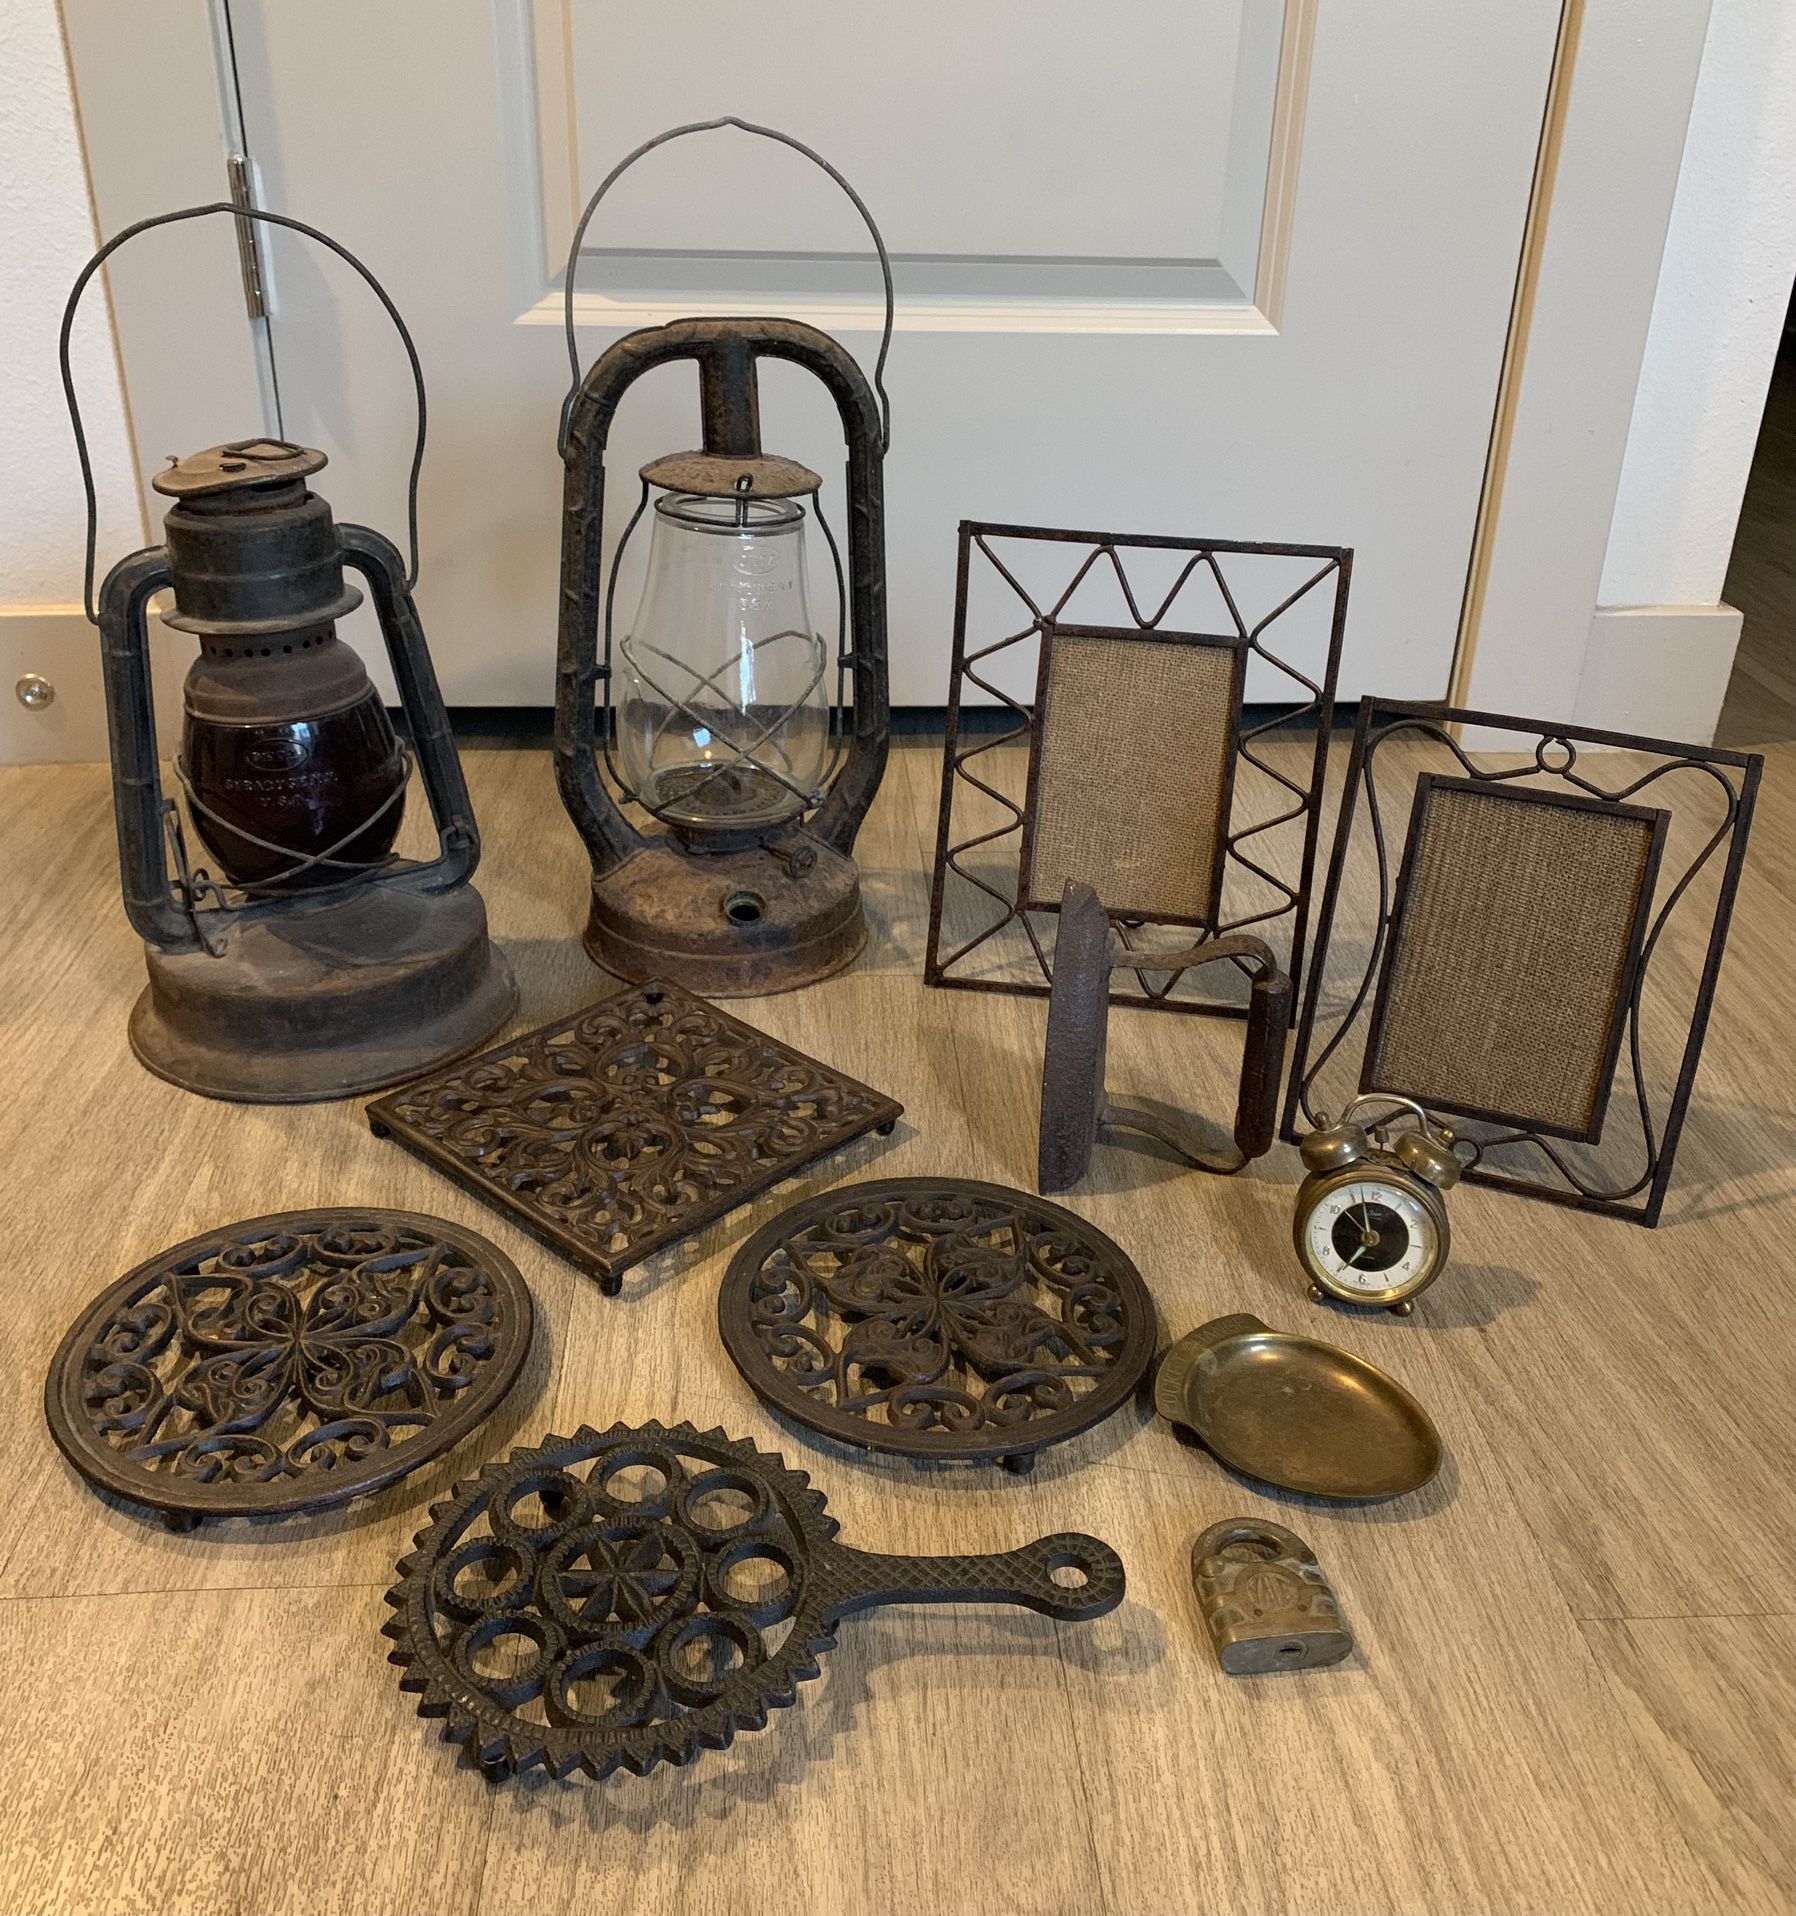 Antique Lanterns, Flat Cast Iron, 4 Stand, 2 Picture Frame… - $150